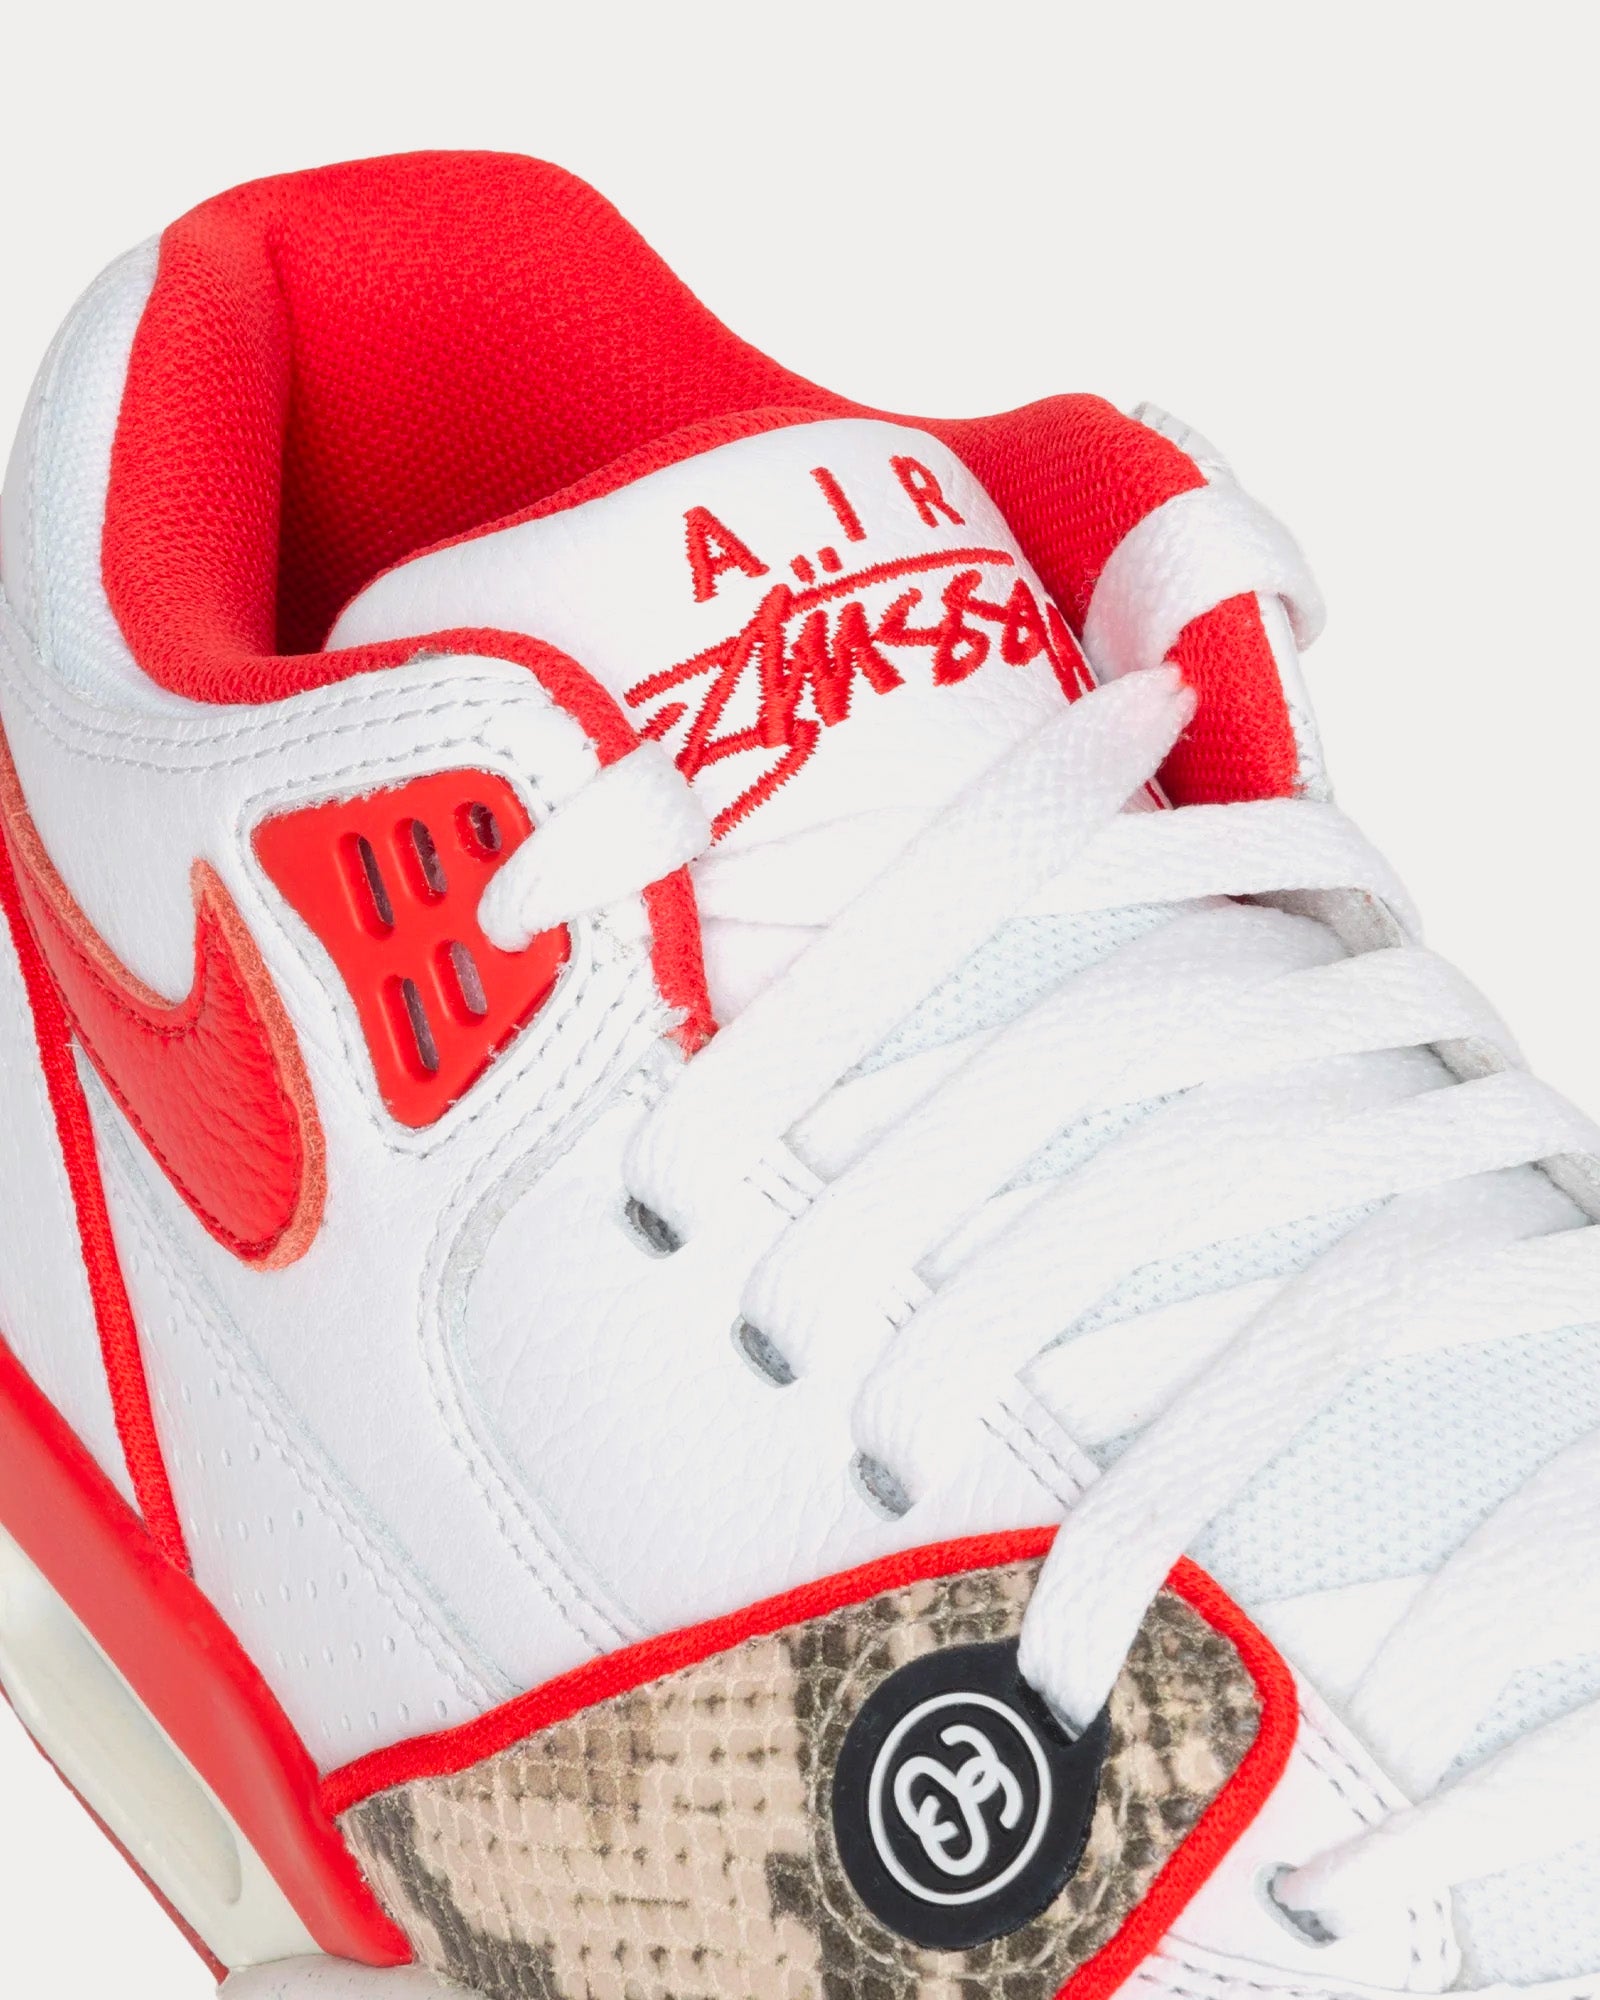 Nike x Stussy - Air Flight '89 Low White / Habanero Red / Sail Low Top Sneakers